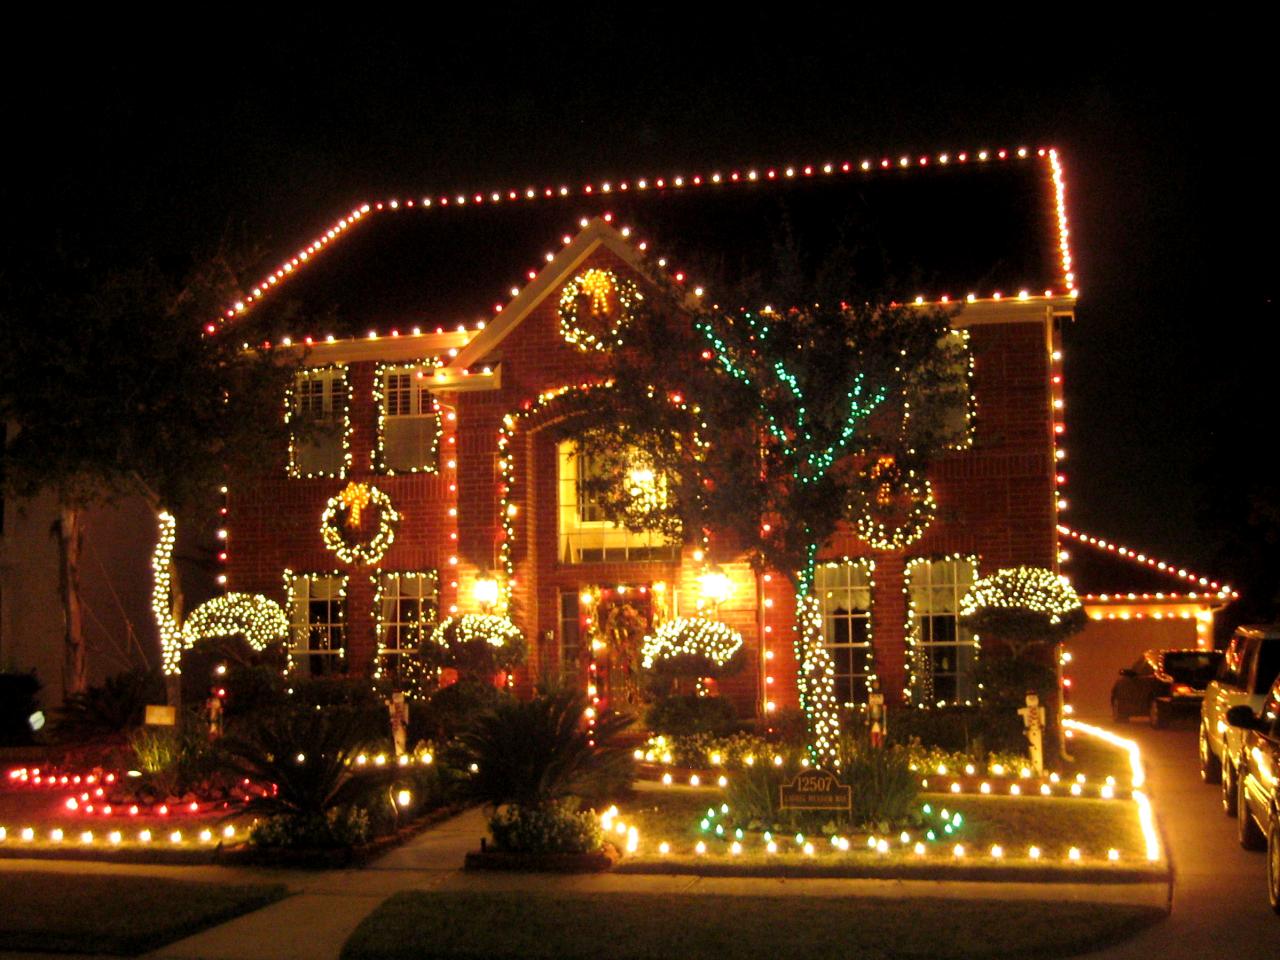 Stunning Outdoor Christmas Displays | Interior Design Styles and Color ...